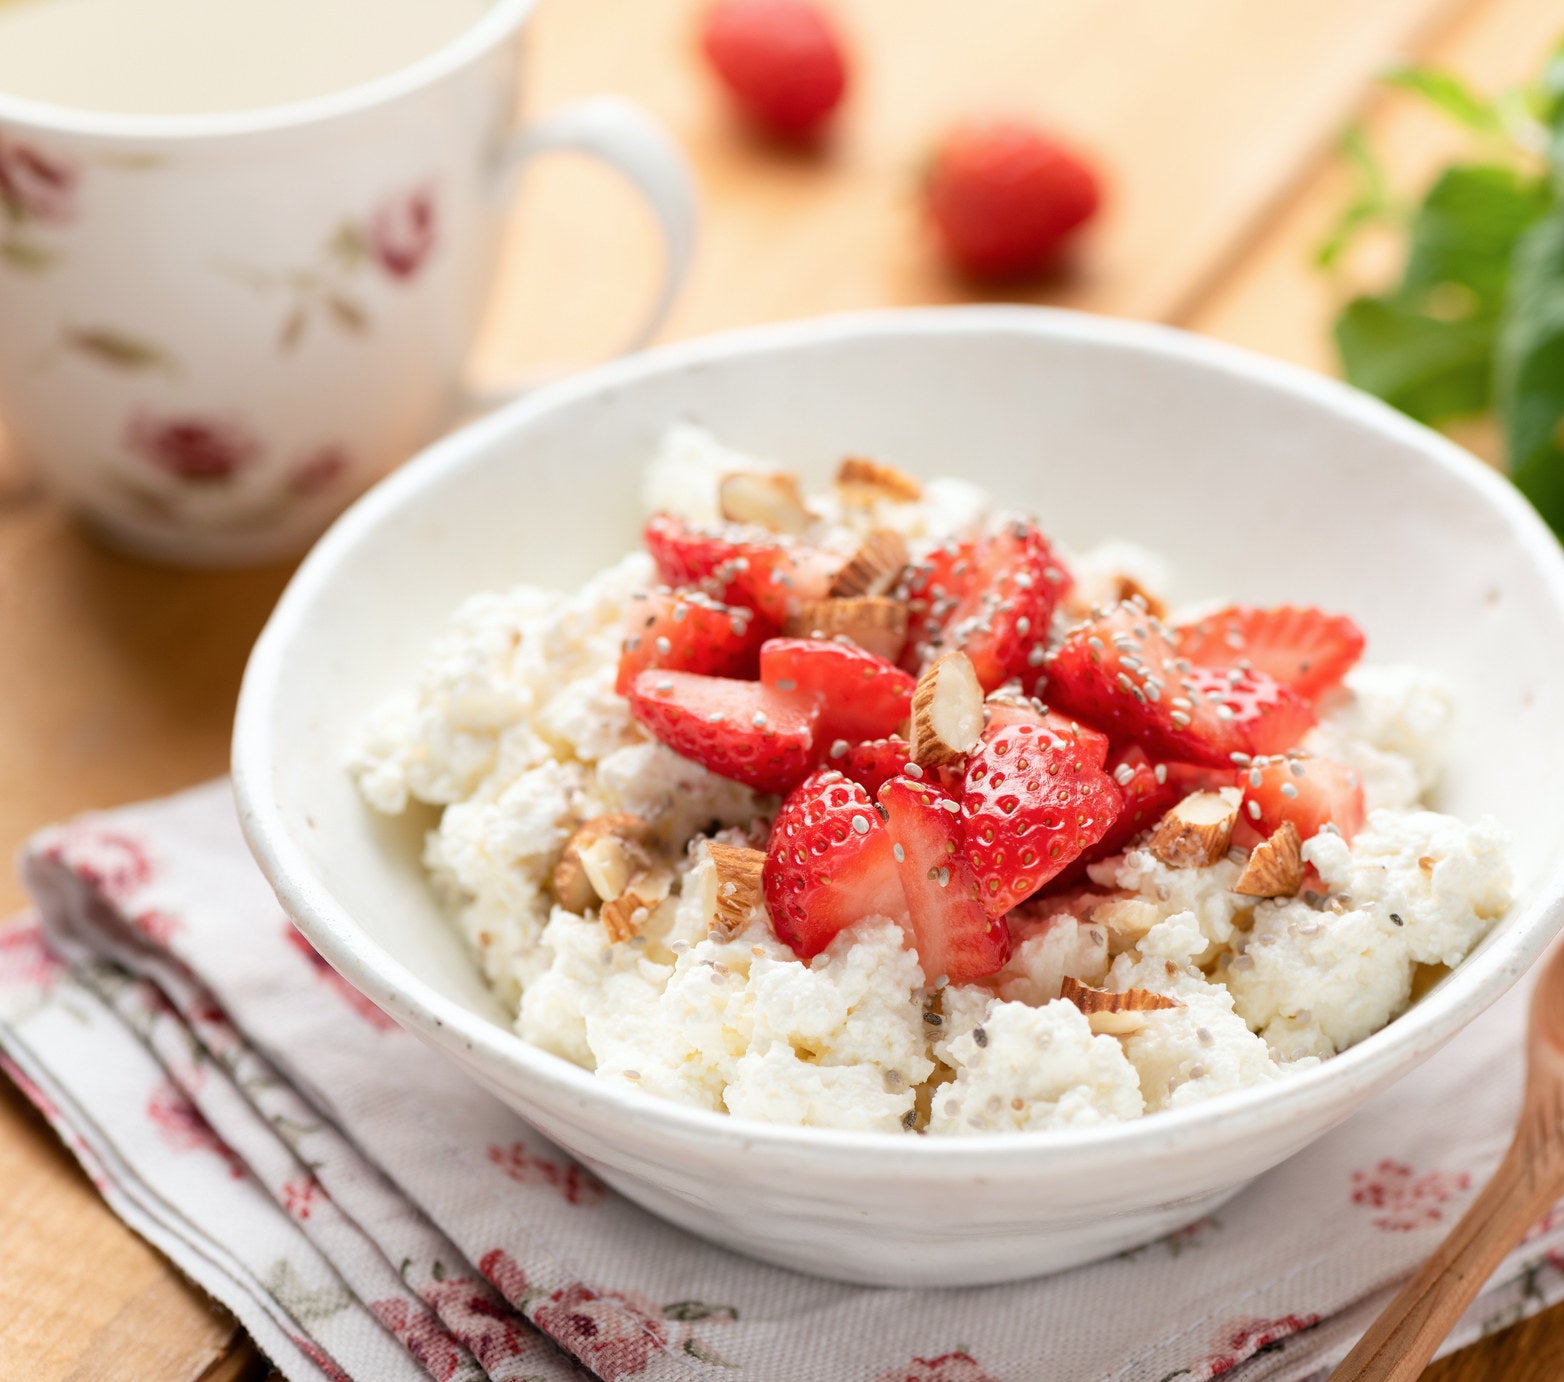 A bowl of cottage cheese with berries.